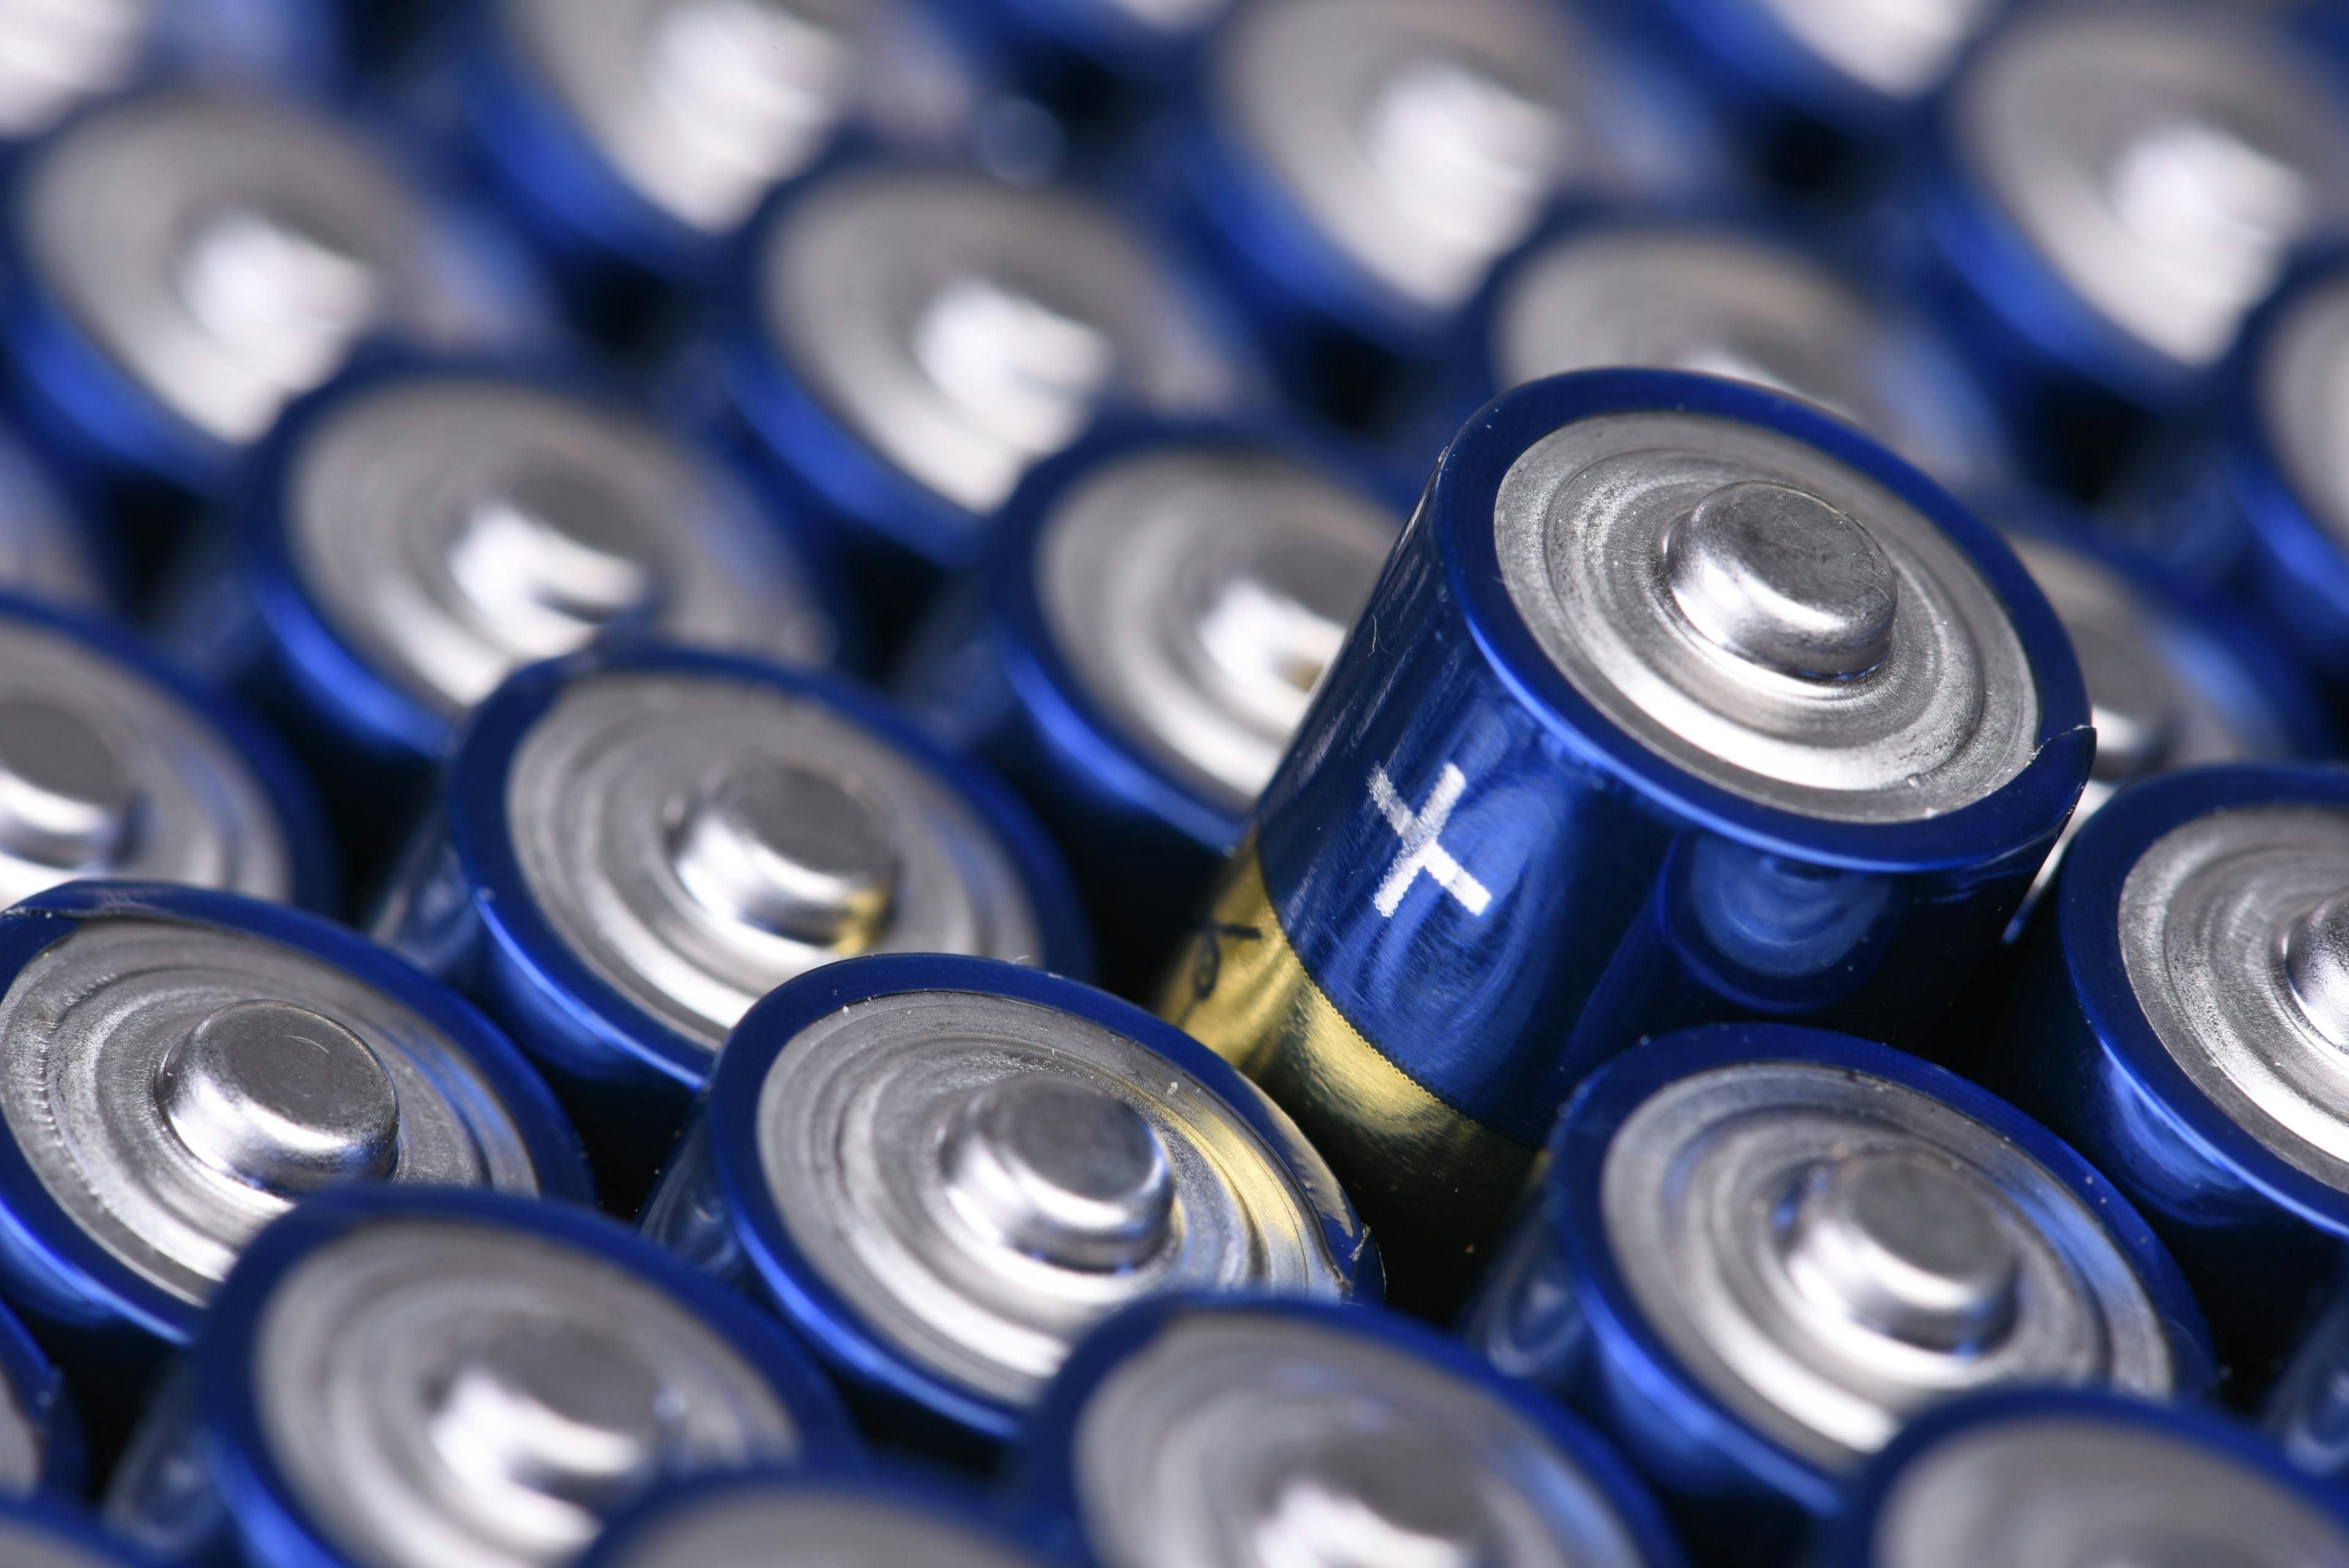 Hospitalizations from battery exposure increased from 2010 to 2017